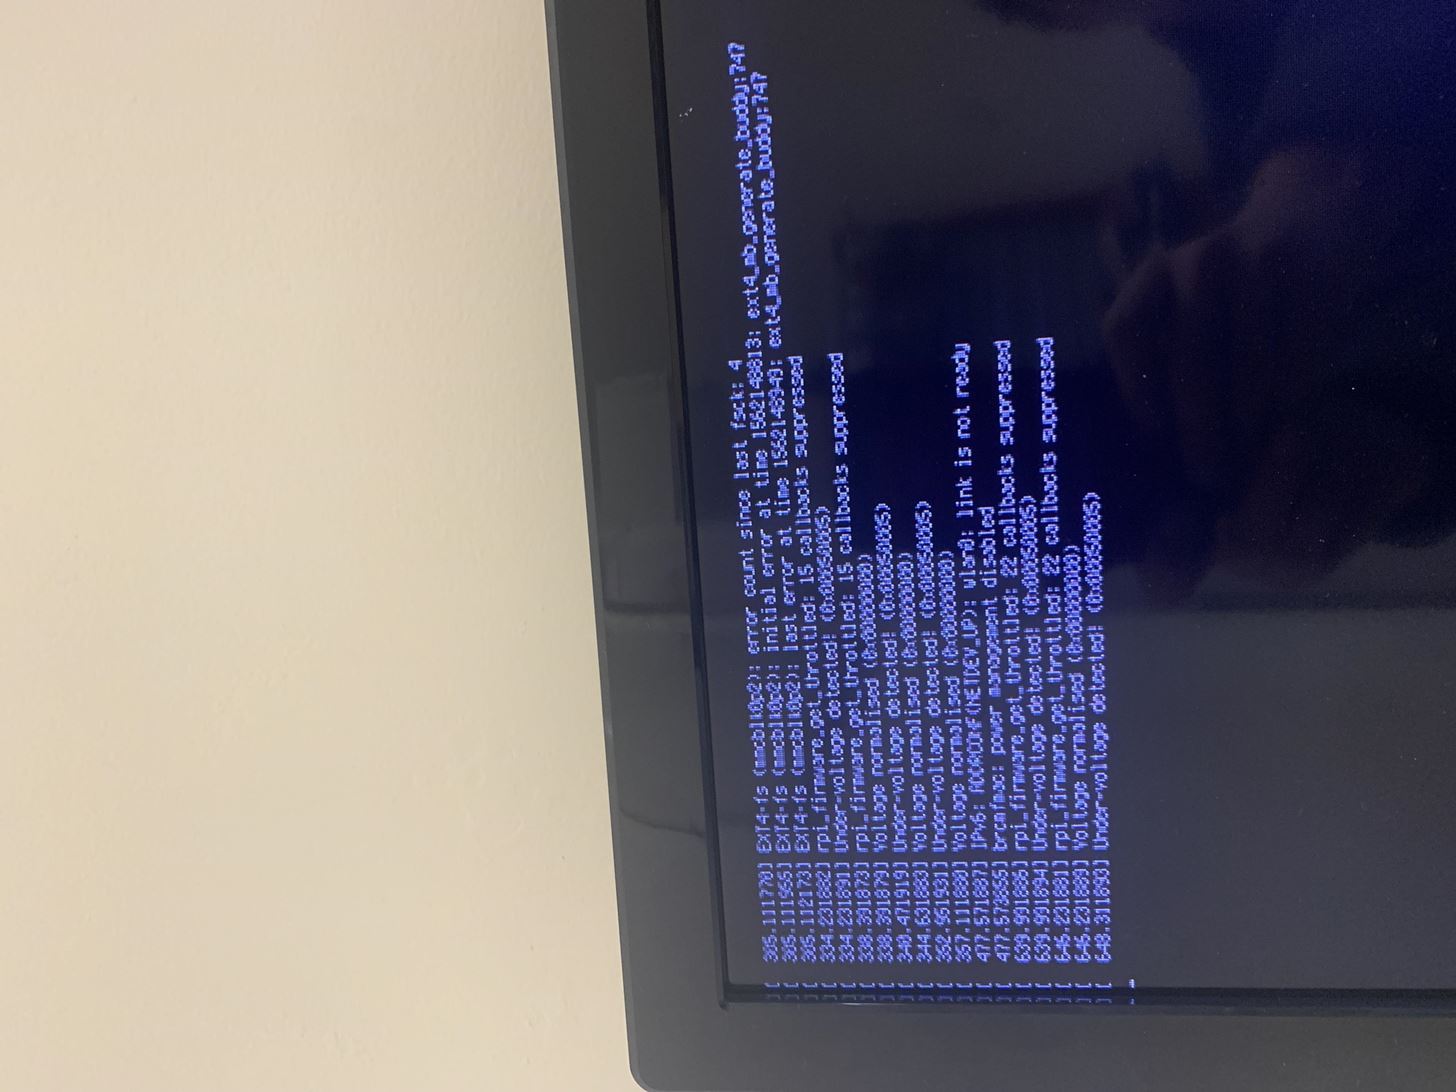 Hey My Raspberry Pi 3 B+ Want Boot Up It Just Keeps Doing This